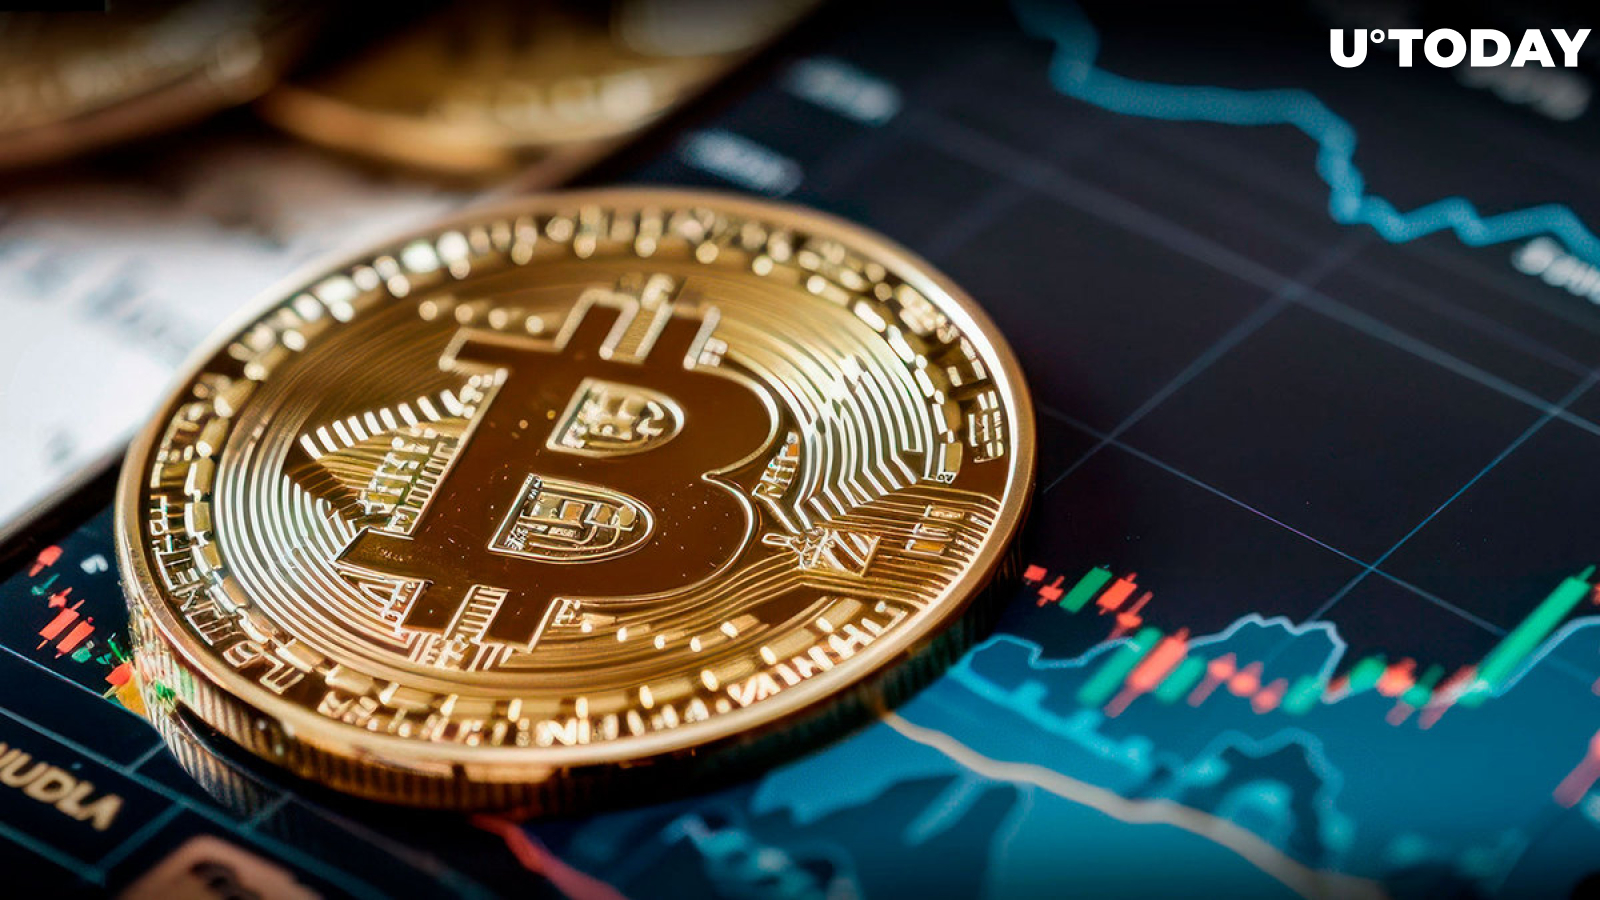 Two Crucial Bitcoin (BTC) Price Levels to Watch This Week